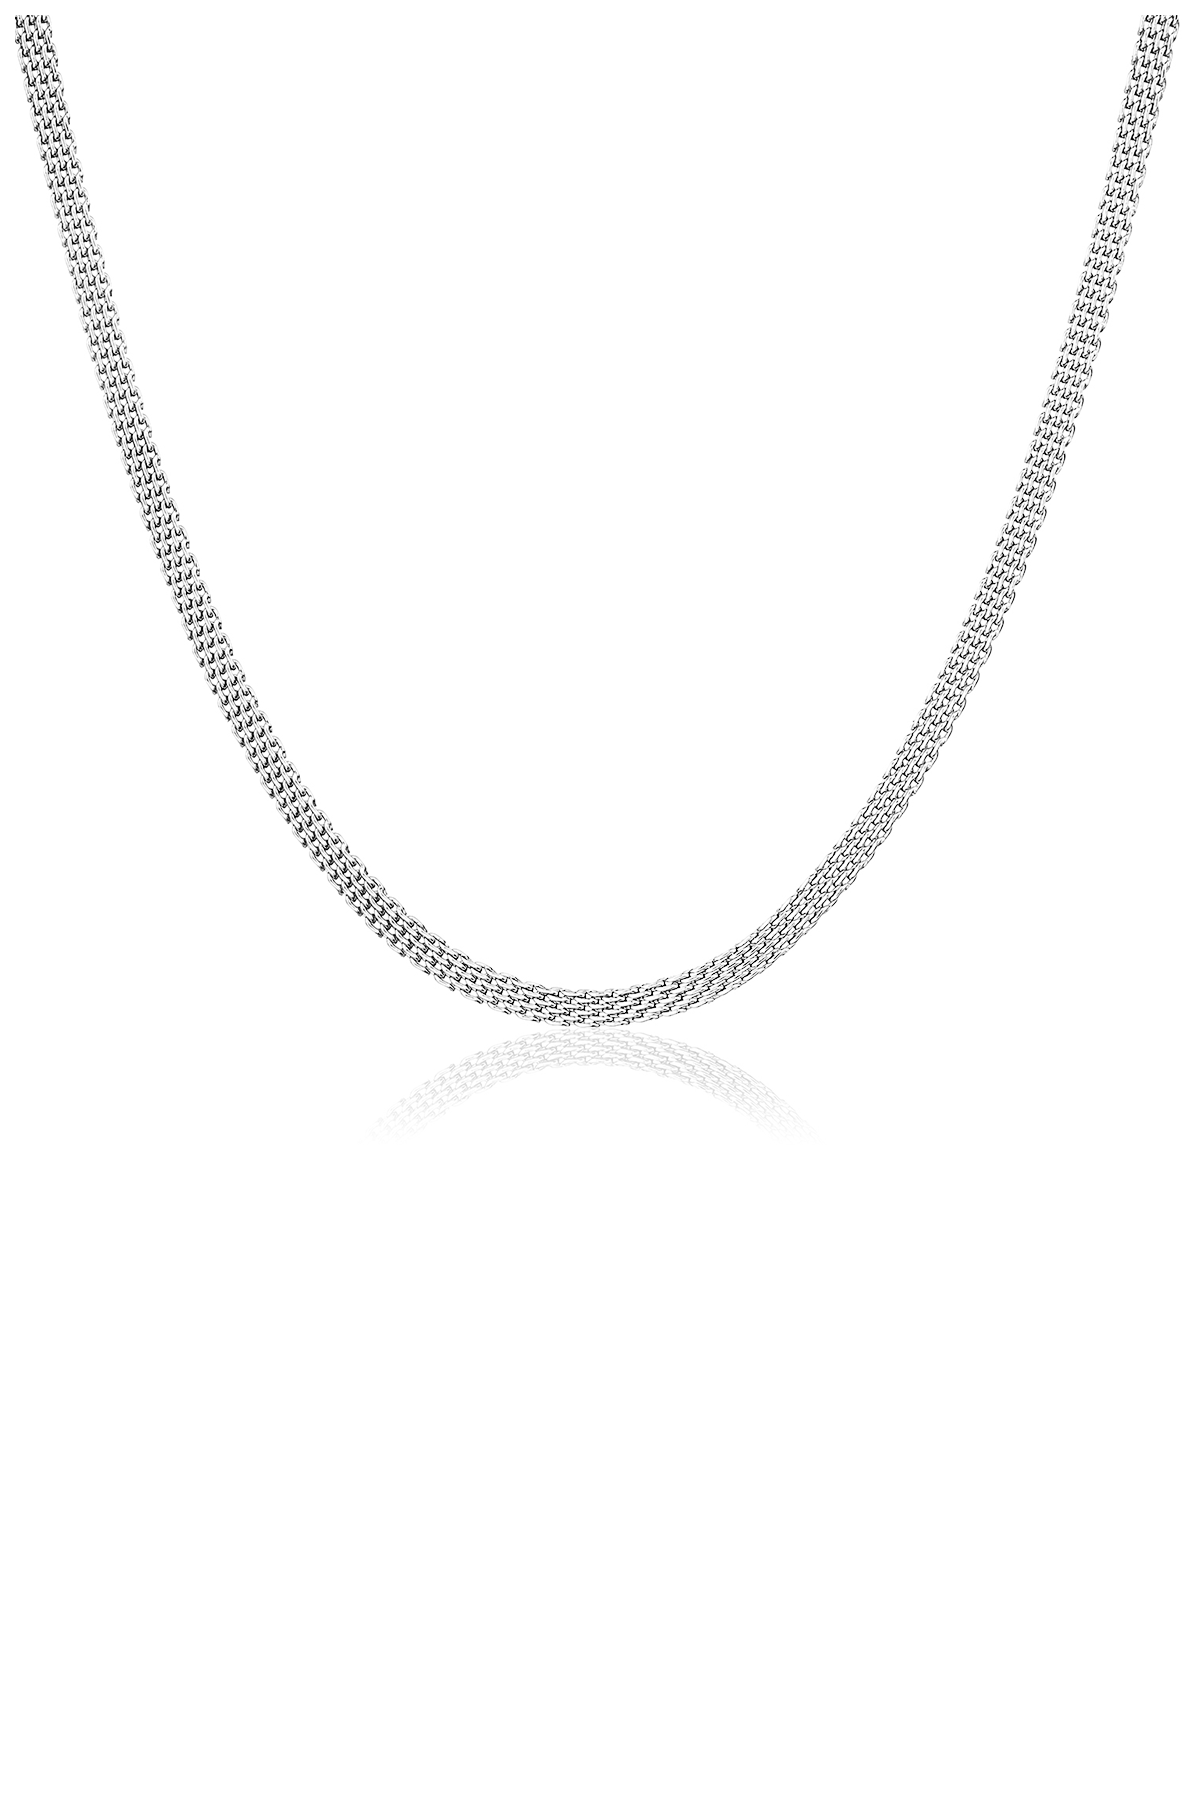 Theresa flat cable necklace, silver - 3 mm